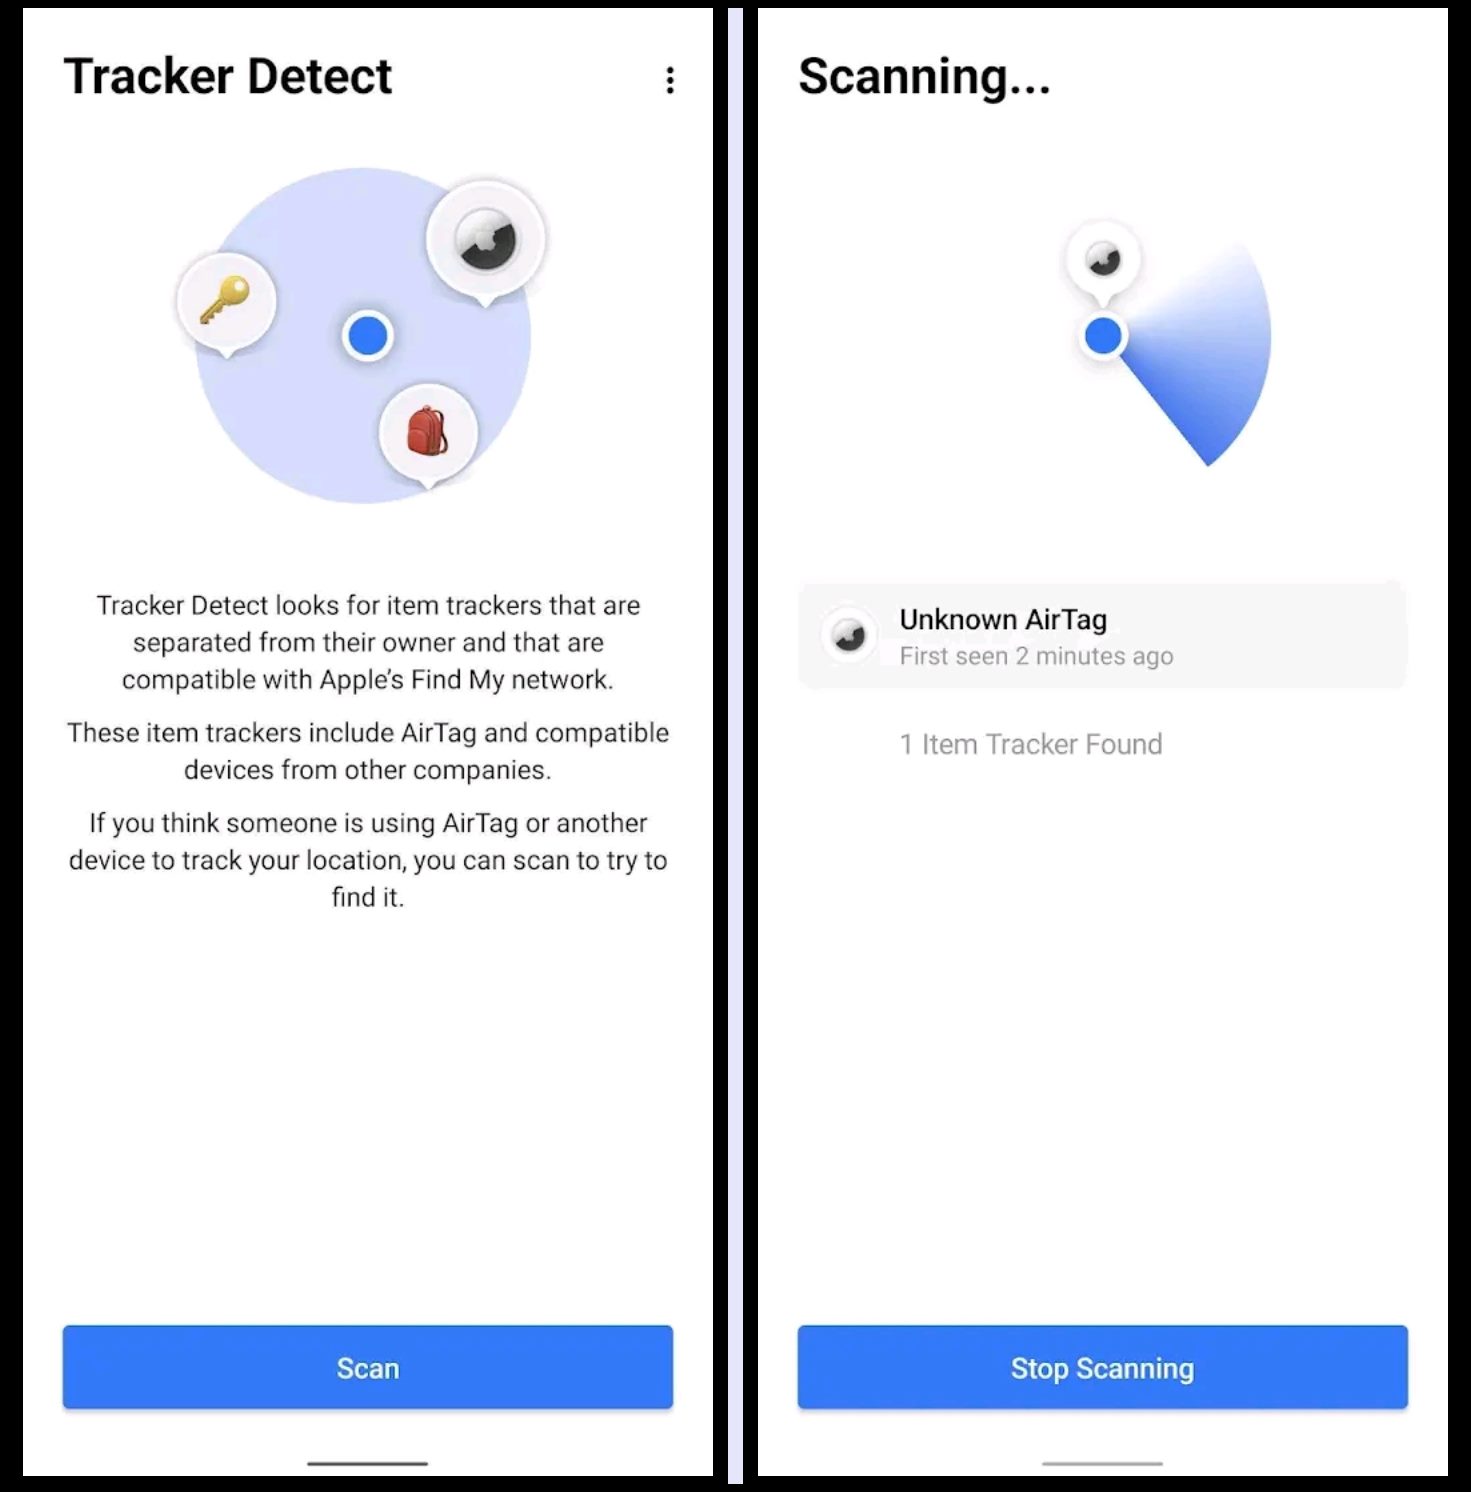 Track AirTags with Android: This image shows 2 screenshots of the Tracker Detect app - One displaying the Tracker Detect app's home screen, another displaying the scanning process in progress.